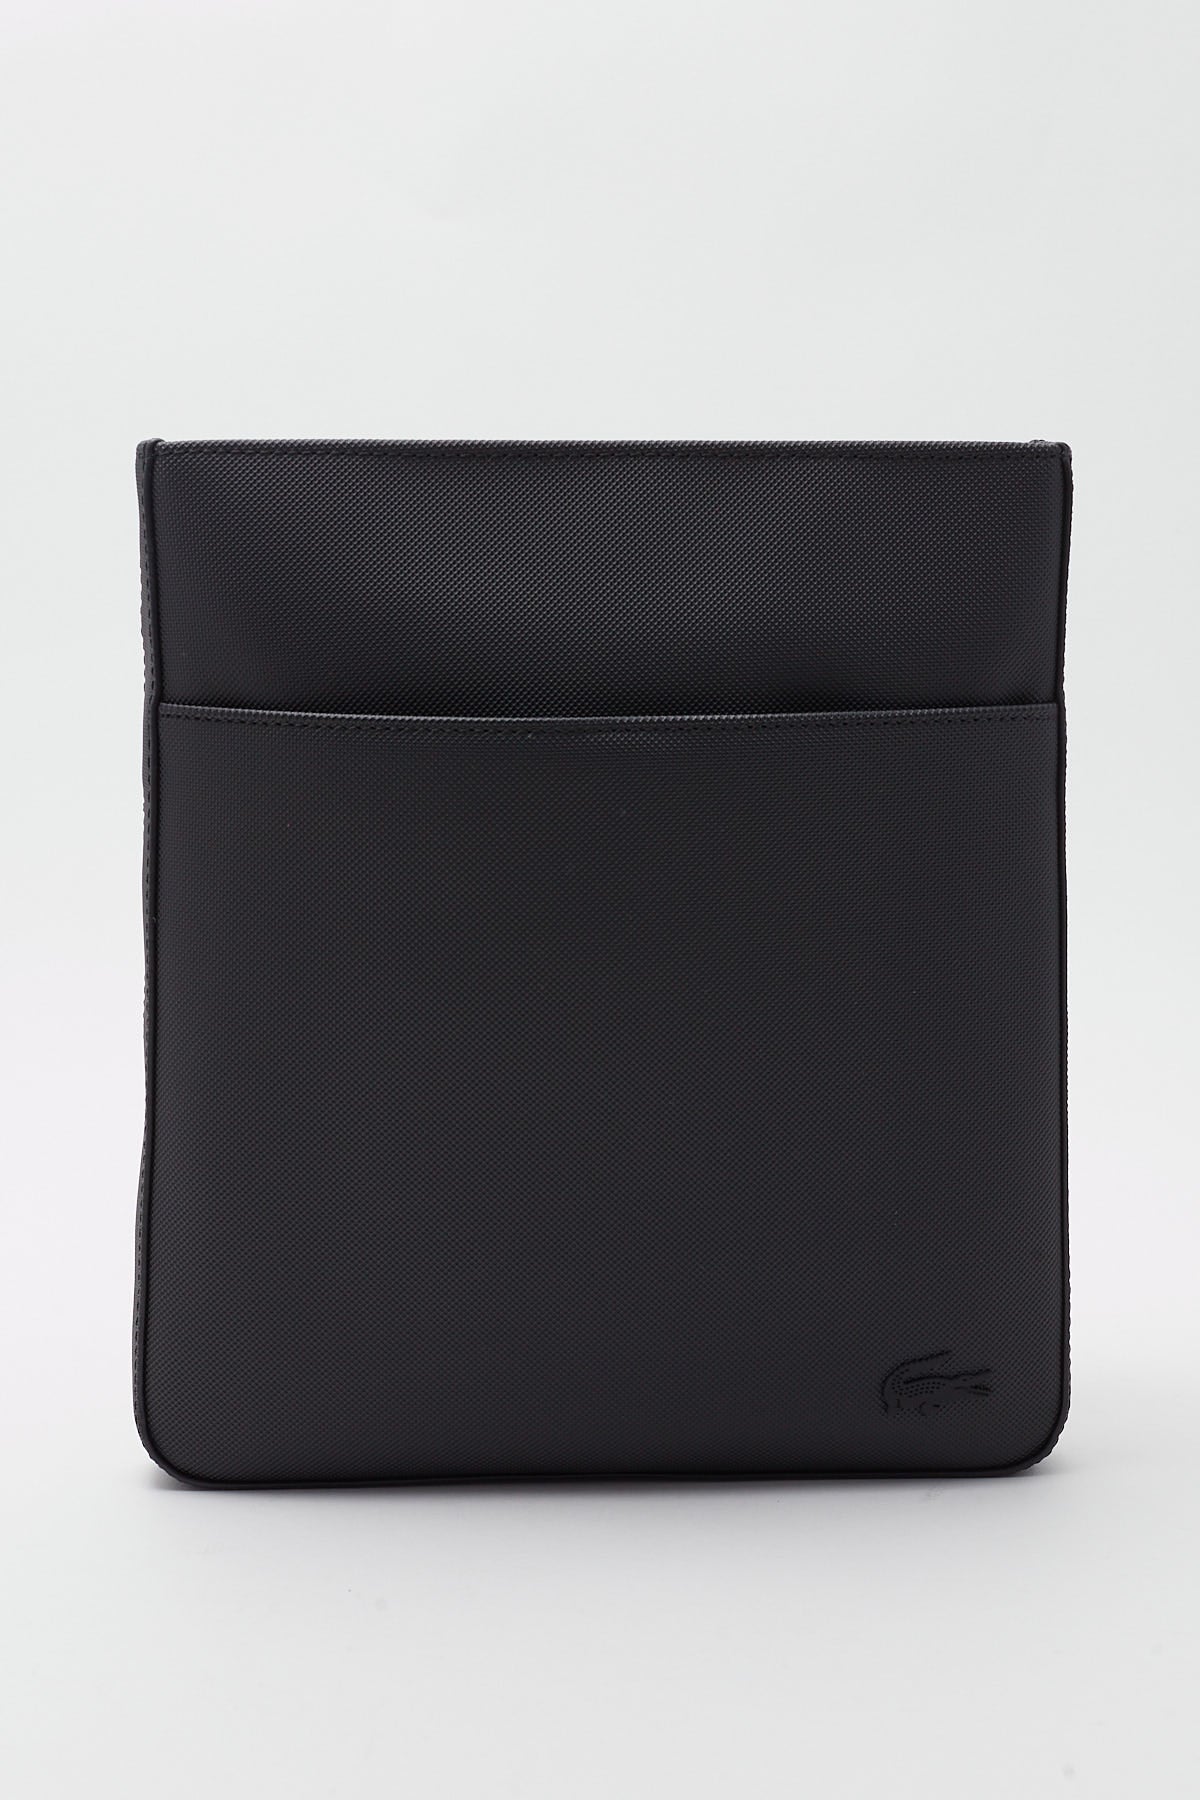 Lacoste Classic Flat Crossover Bag Black